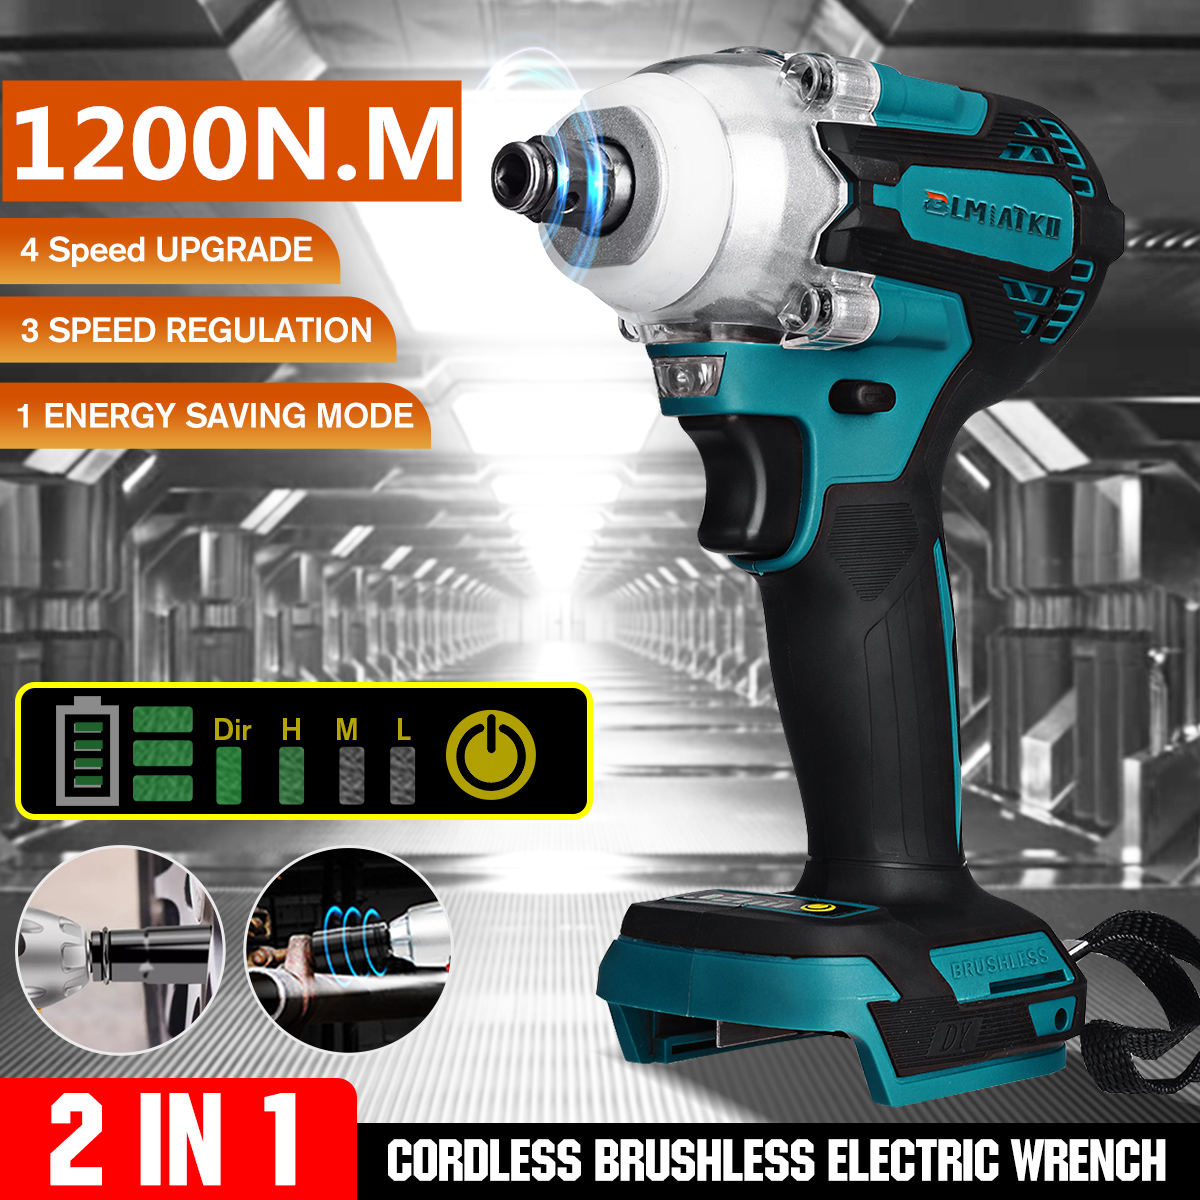 480Nm-Brushless-Impact-Wrench-Cordless-High-Torque-12-Socket-Electric-Wrench-Screwdriver-Power-Tool--1841579-1